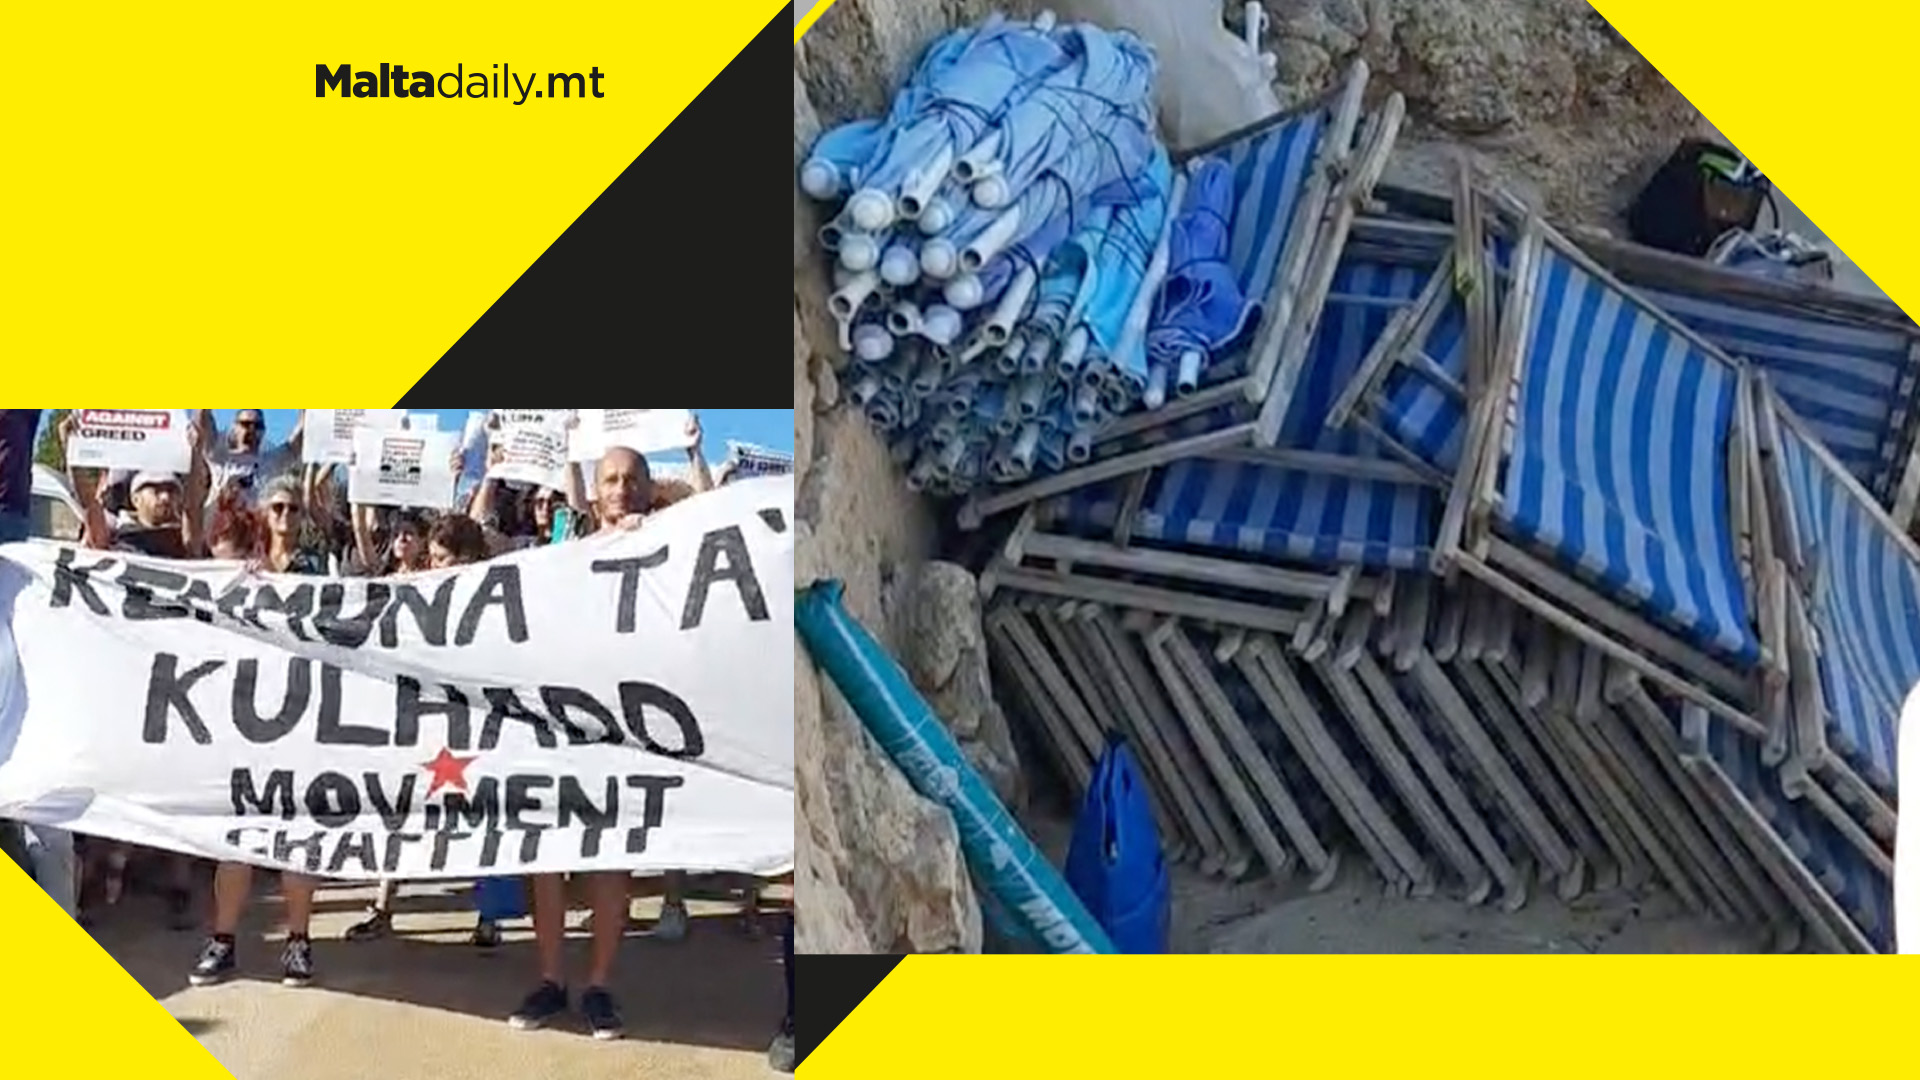 Activists remove deckchairs & umbrellas from Blue Lagoon; "Comino's shore is for everyone"